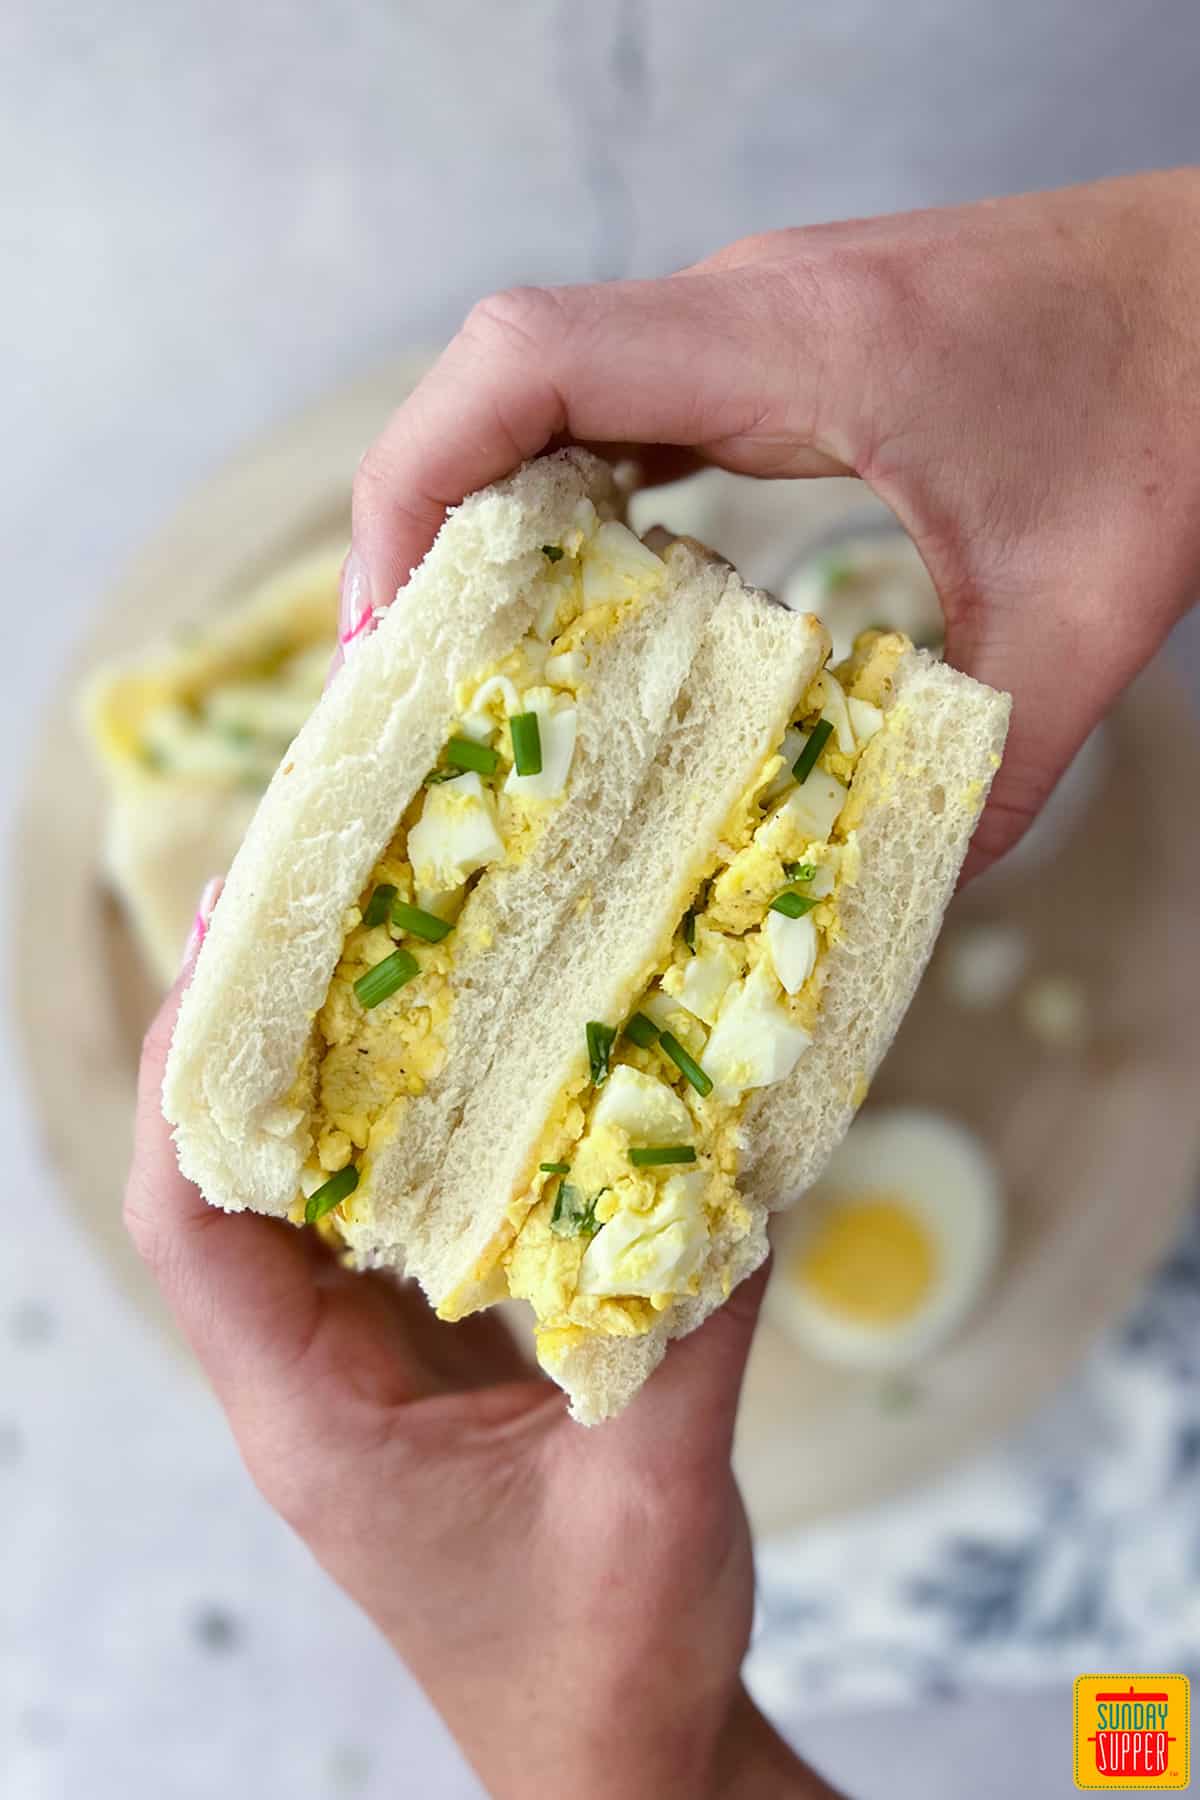 holding two egg sandwiches